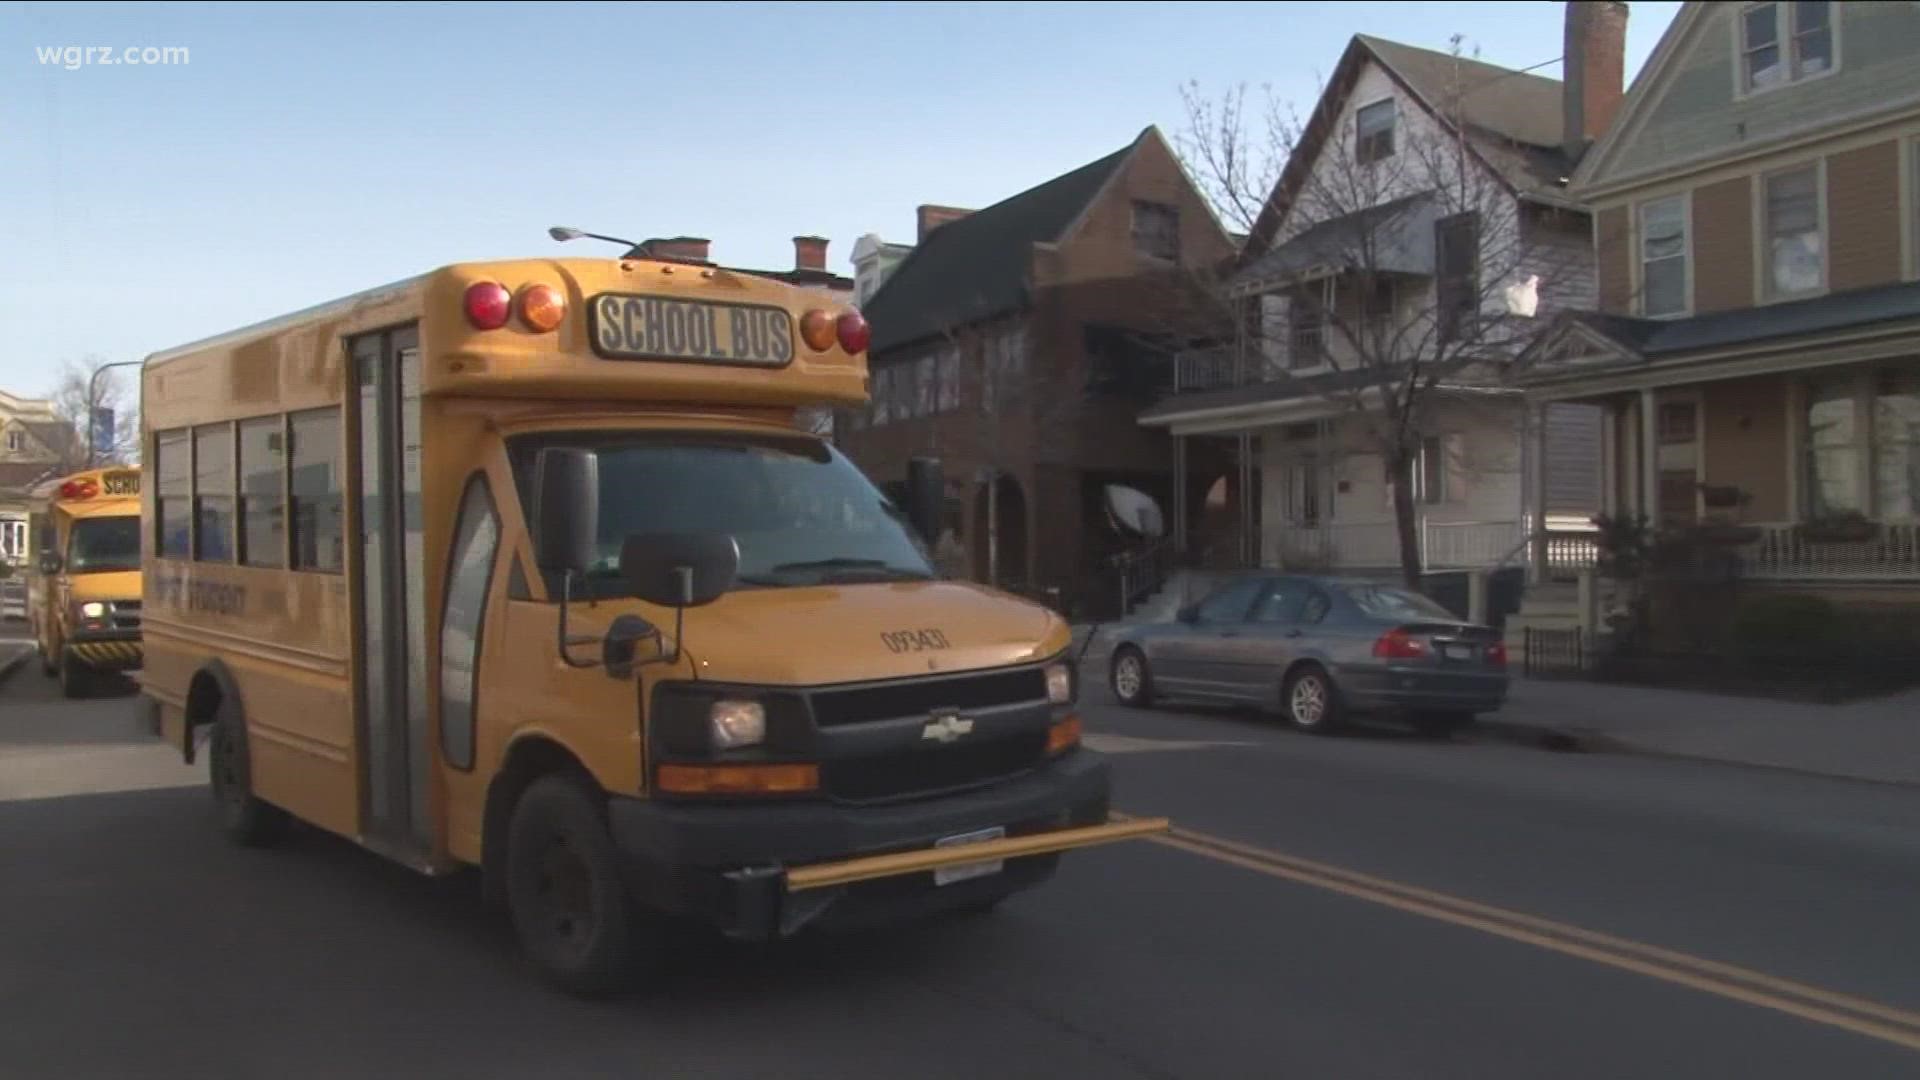 With the ongoing bus driver shortage, one NYS Assemblyman says the governor needs to activate the national guard.